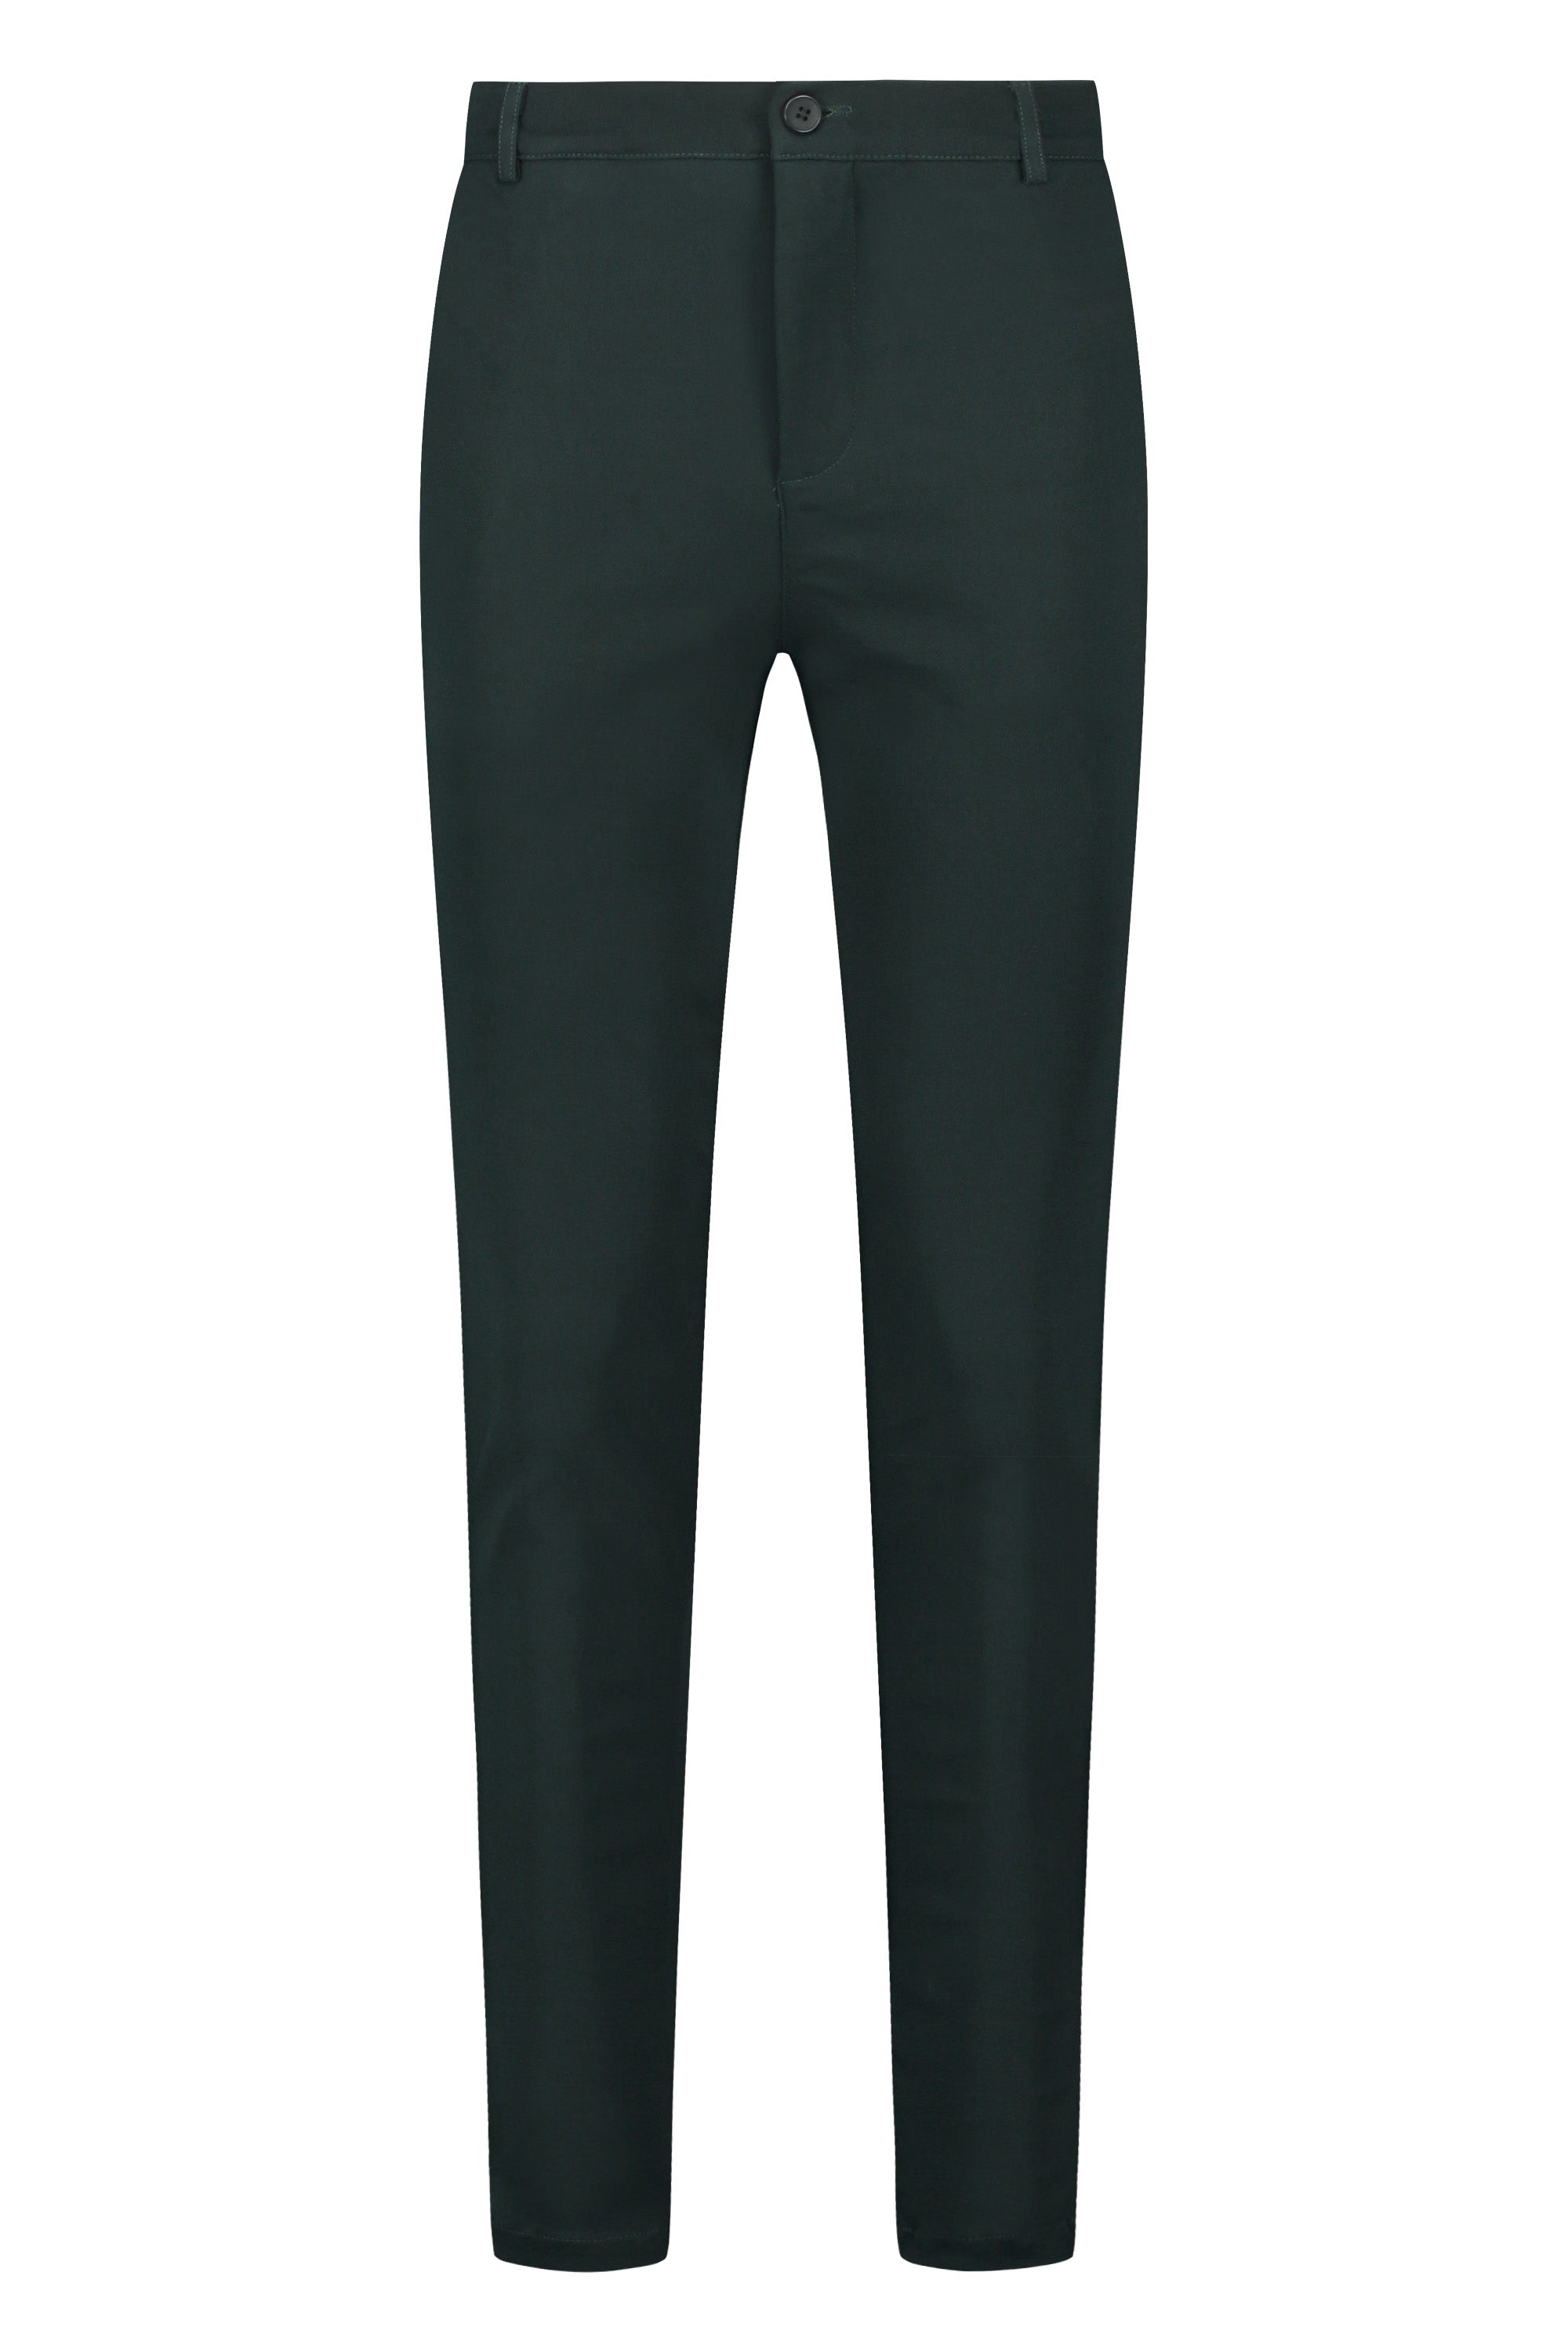 Super stretch trousers forest green